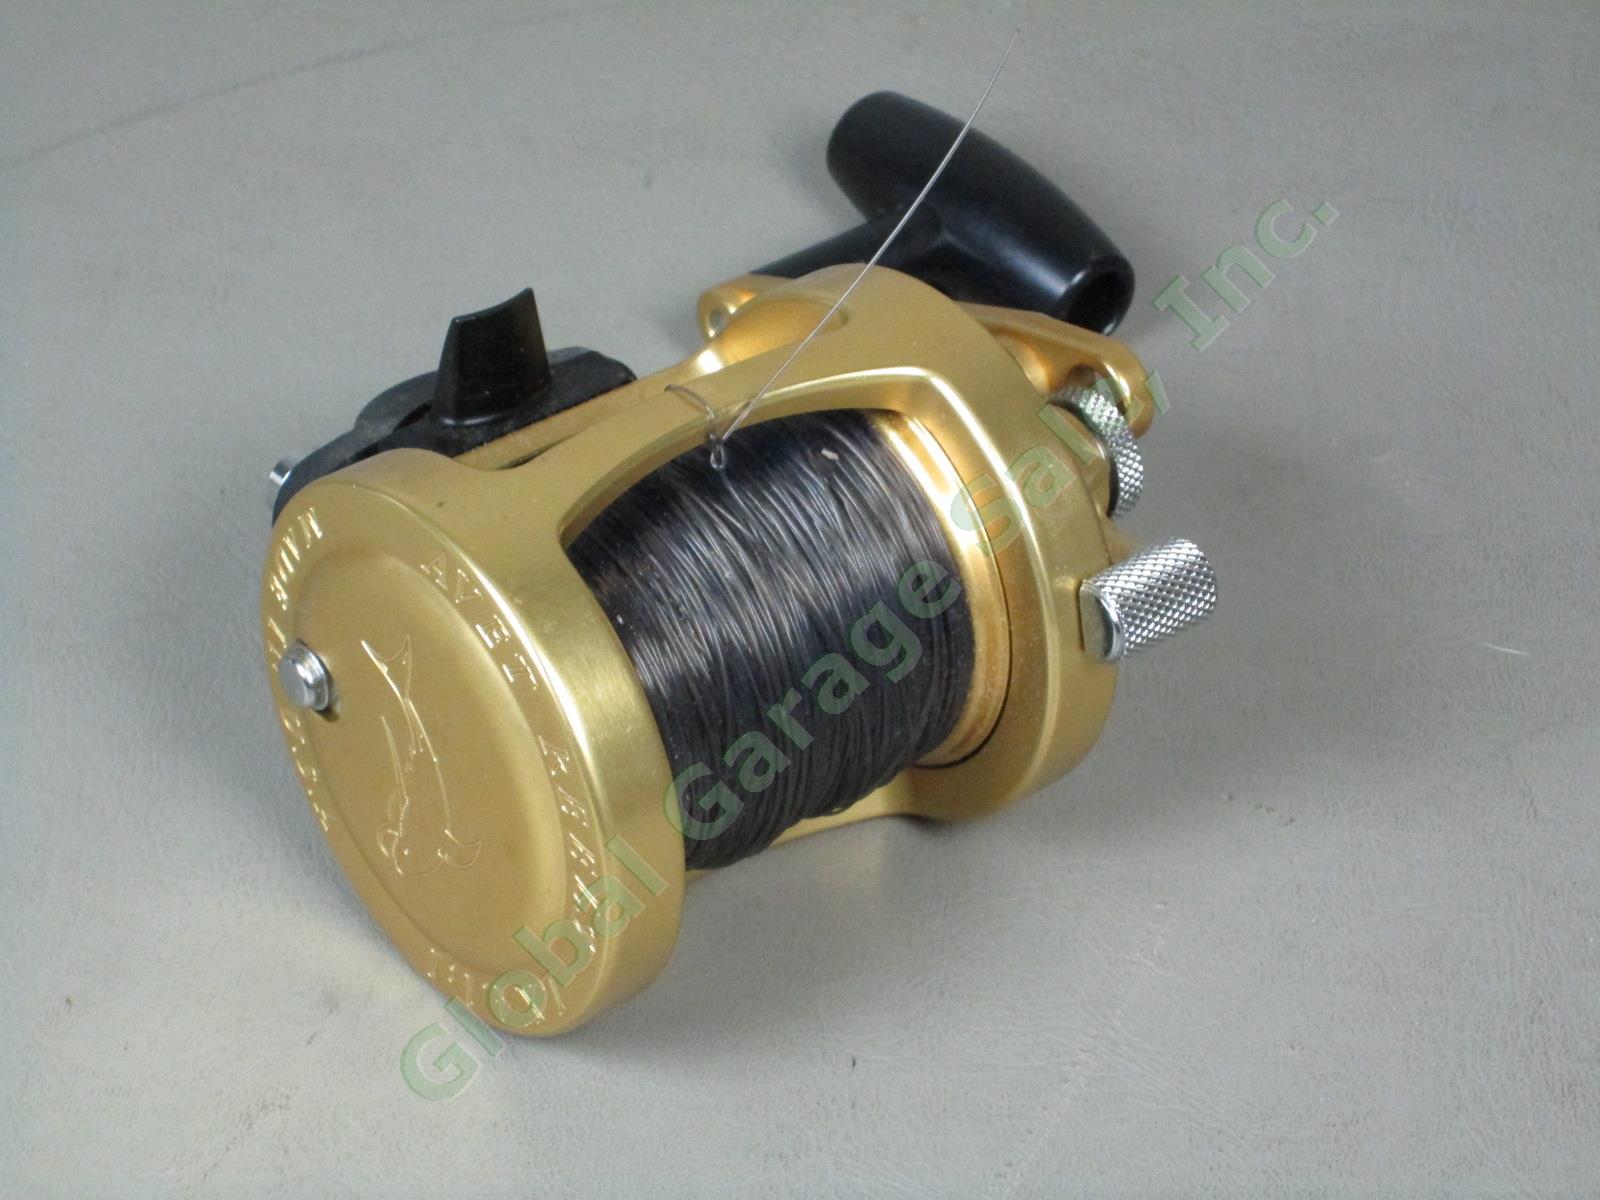 Avet LX 4.1.1 Lever Drag Gold Fishing Reel Stainless Bearings USA Made EXC+ Cond 3